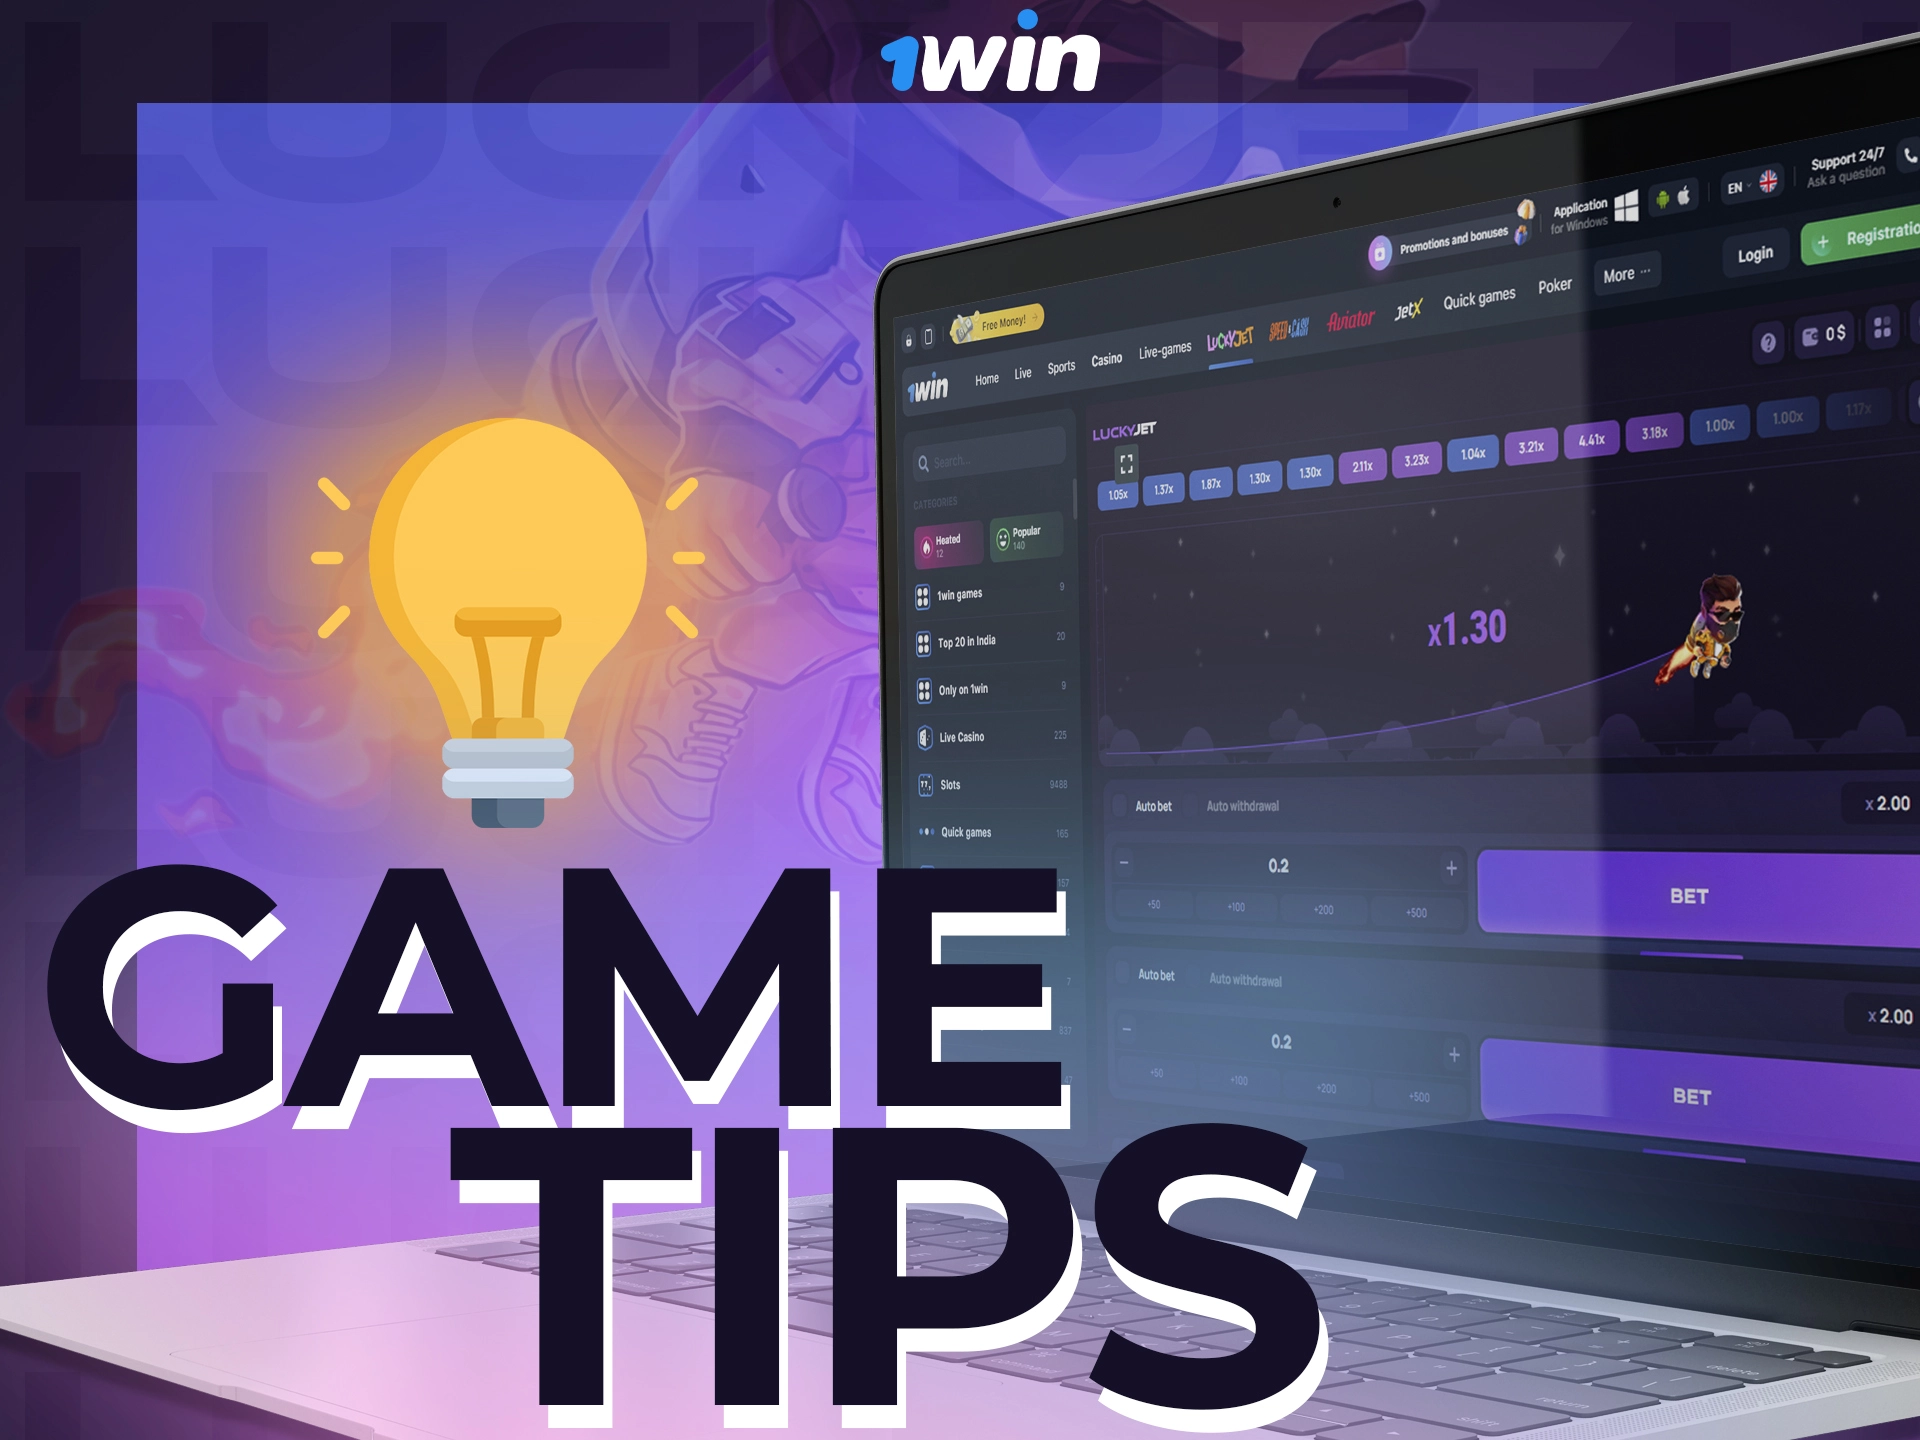 Try following these tips in the Lucky Jet game at 1win.